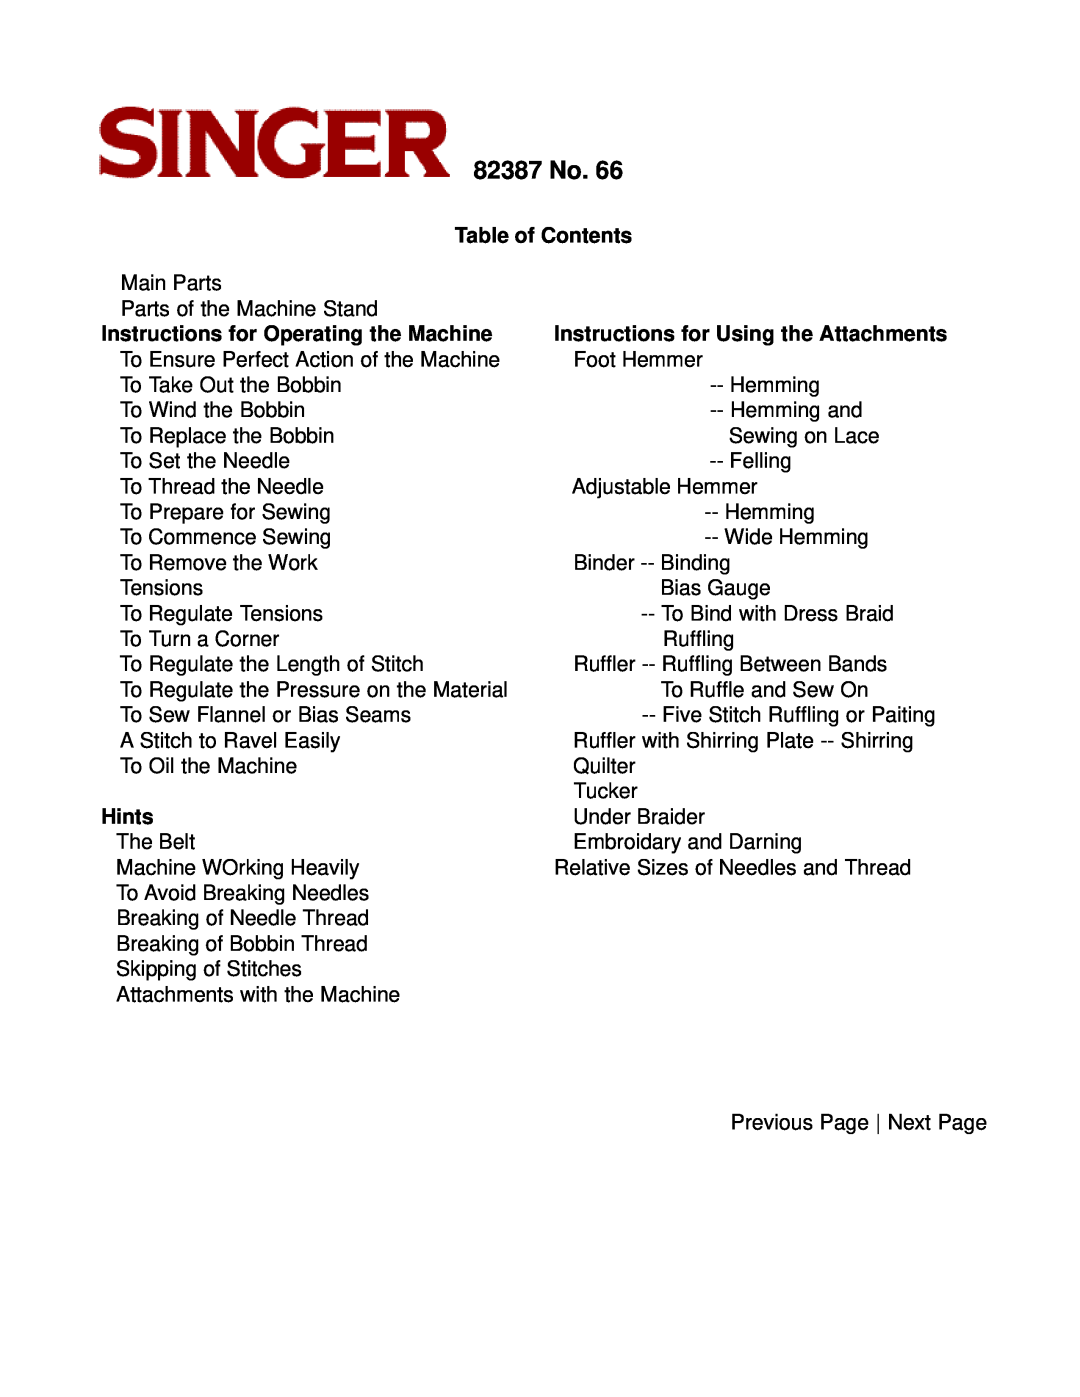 Singer instruction manual Table of Contents, Hints, Instructions for Using the Attachments Foot Hemmer, 82387 No 